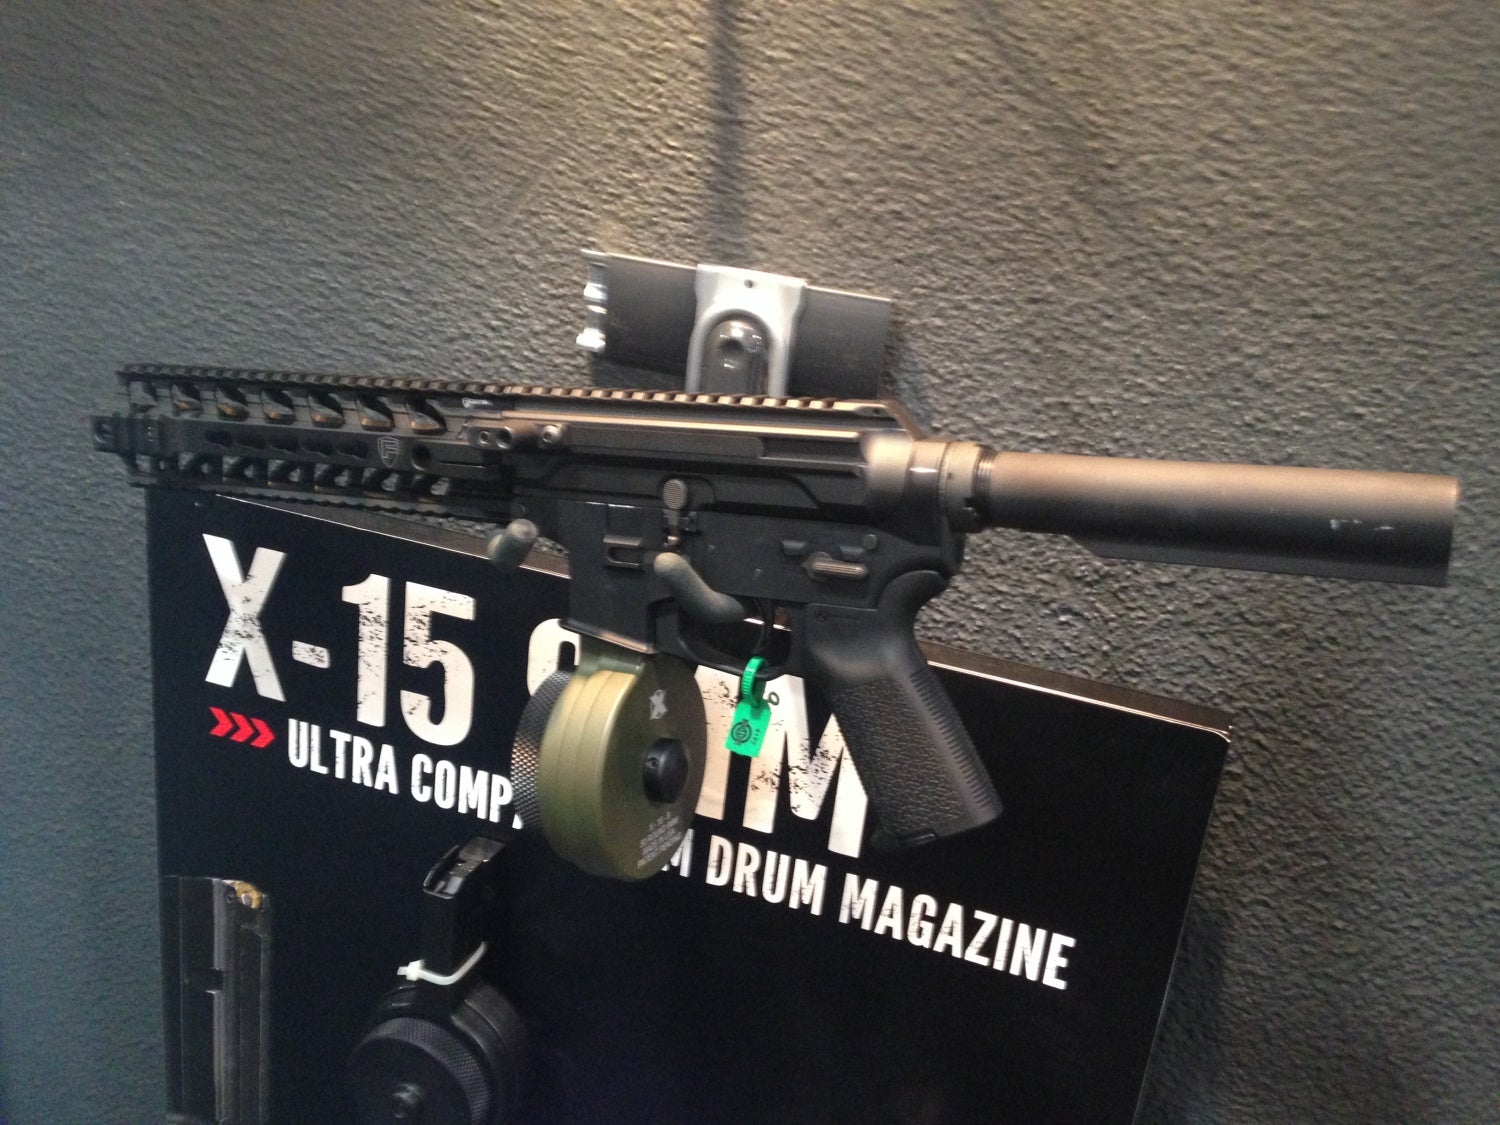 For a third product they are making a 32 rd drum magazine for Glock pistols...